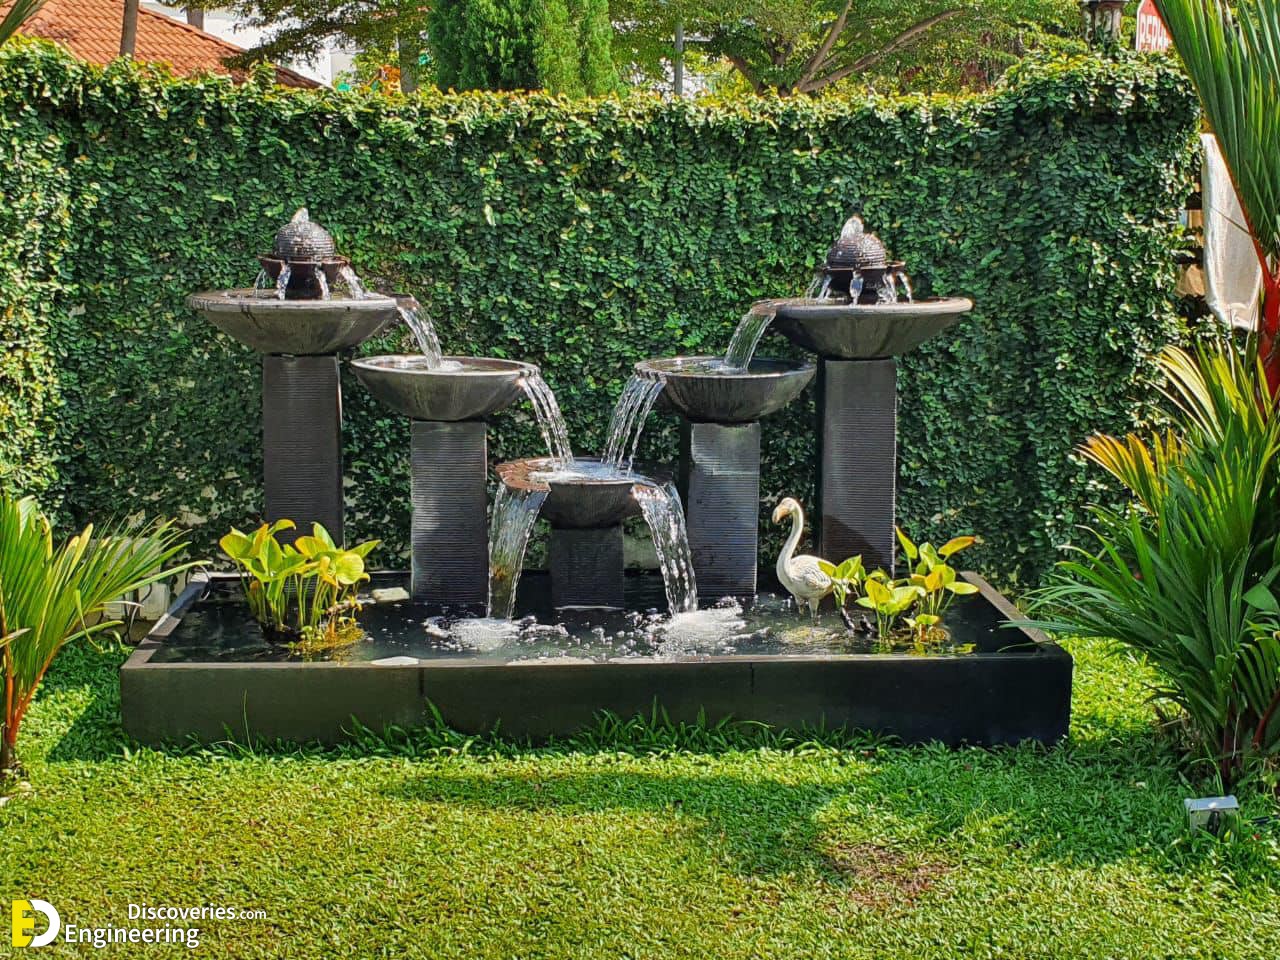 35 engineering discoveries amazing water fountain ideas to transform your home into a serene oasis